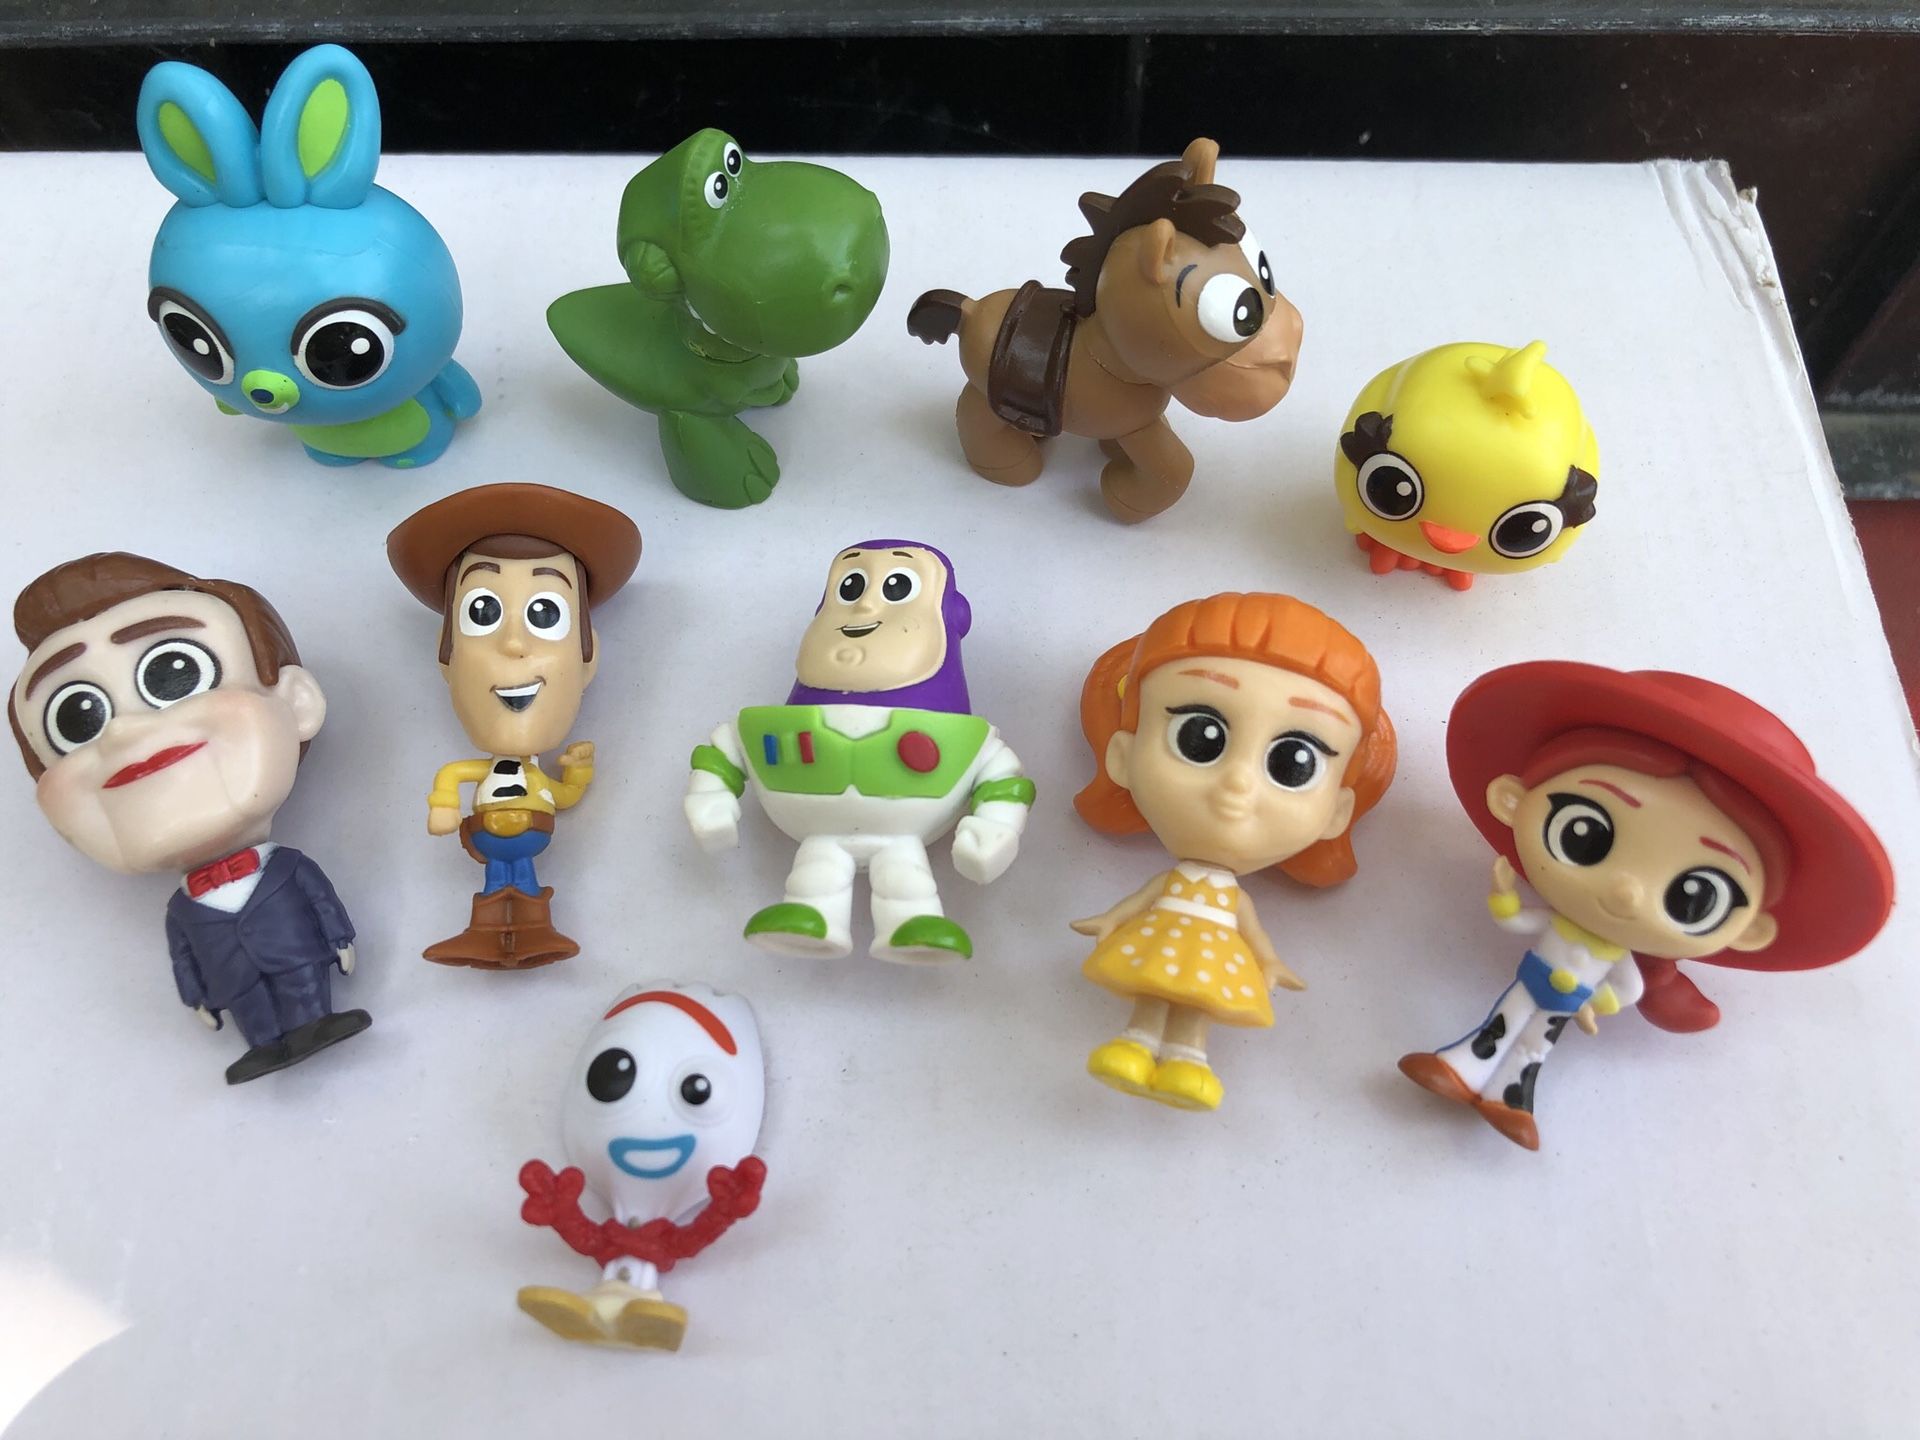 Collectible Toy Story 4 mini figures (10pcs)